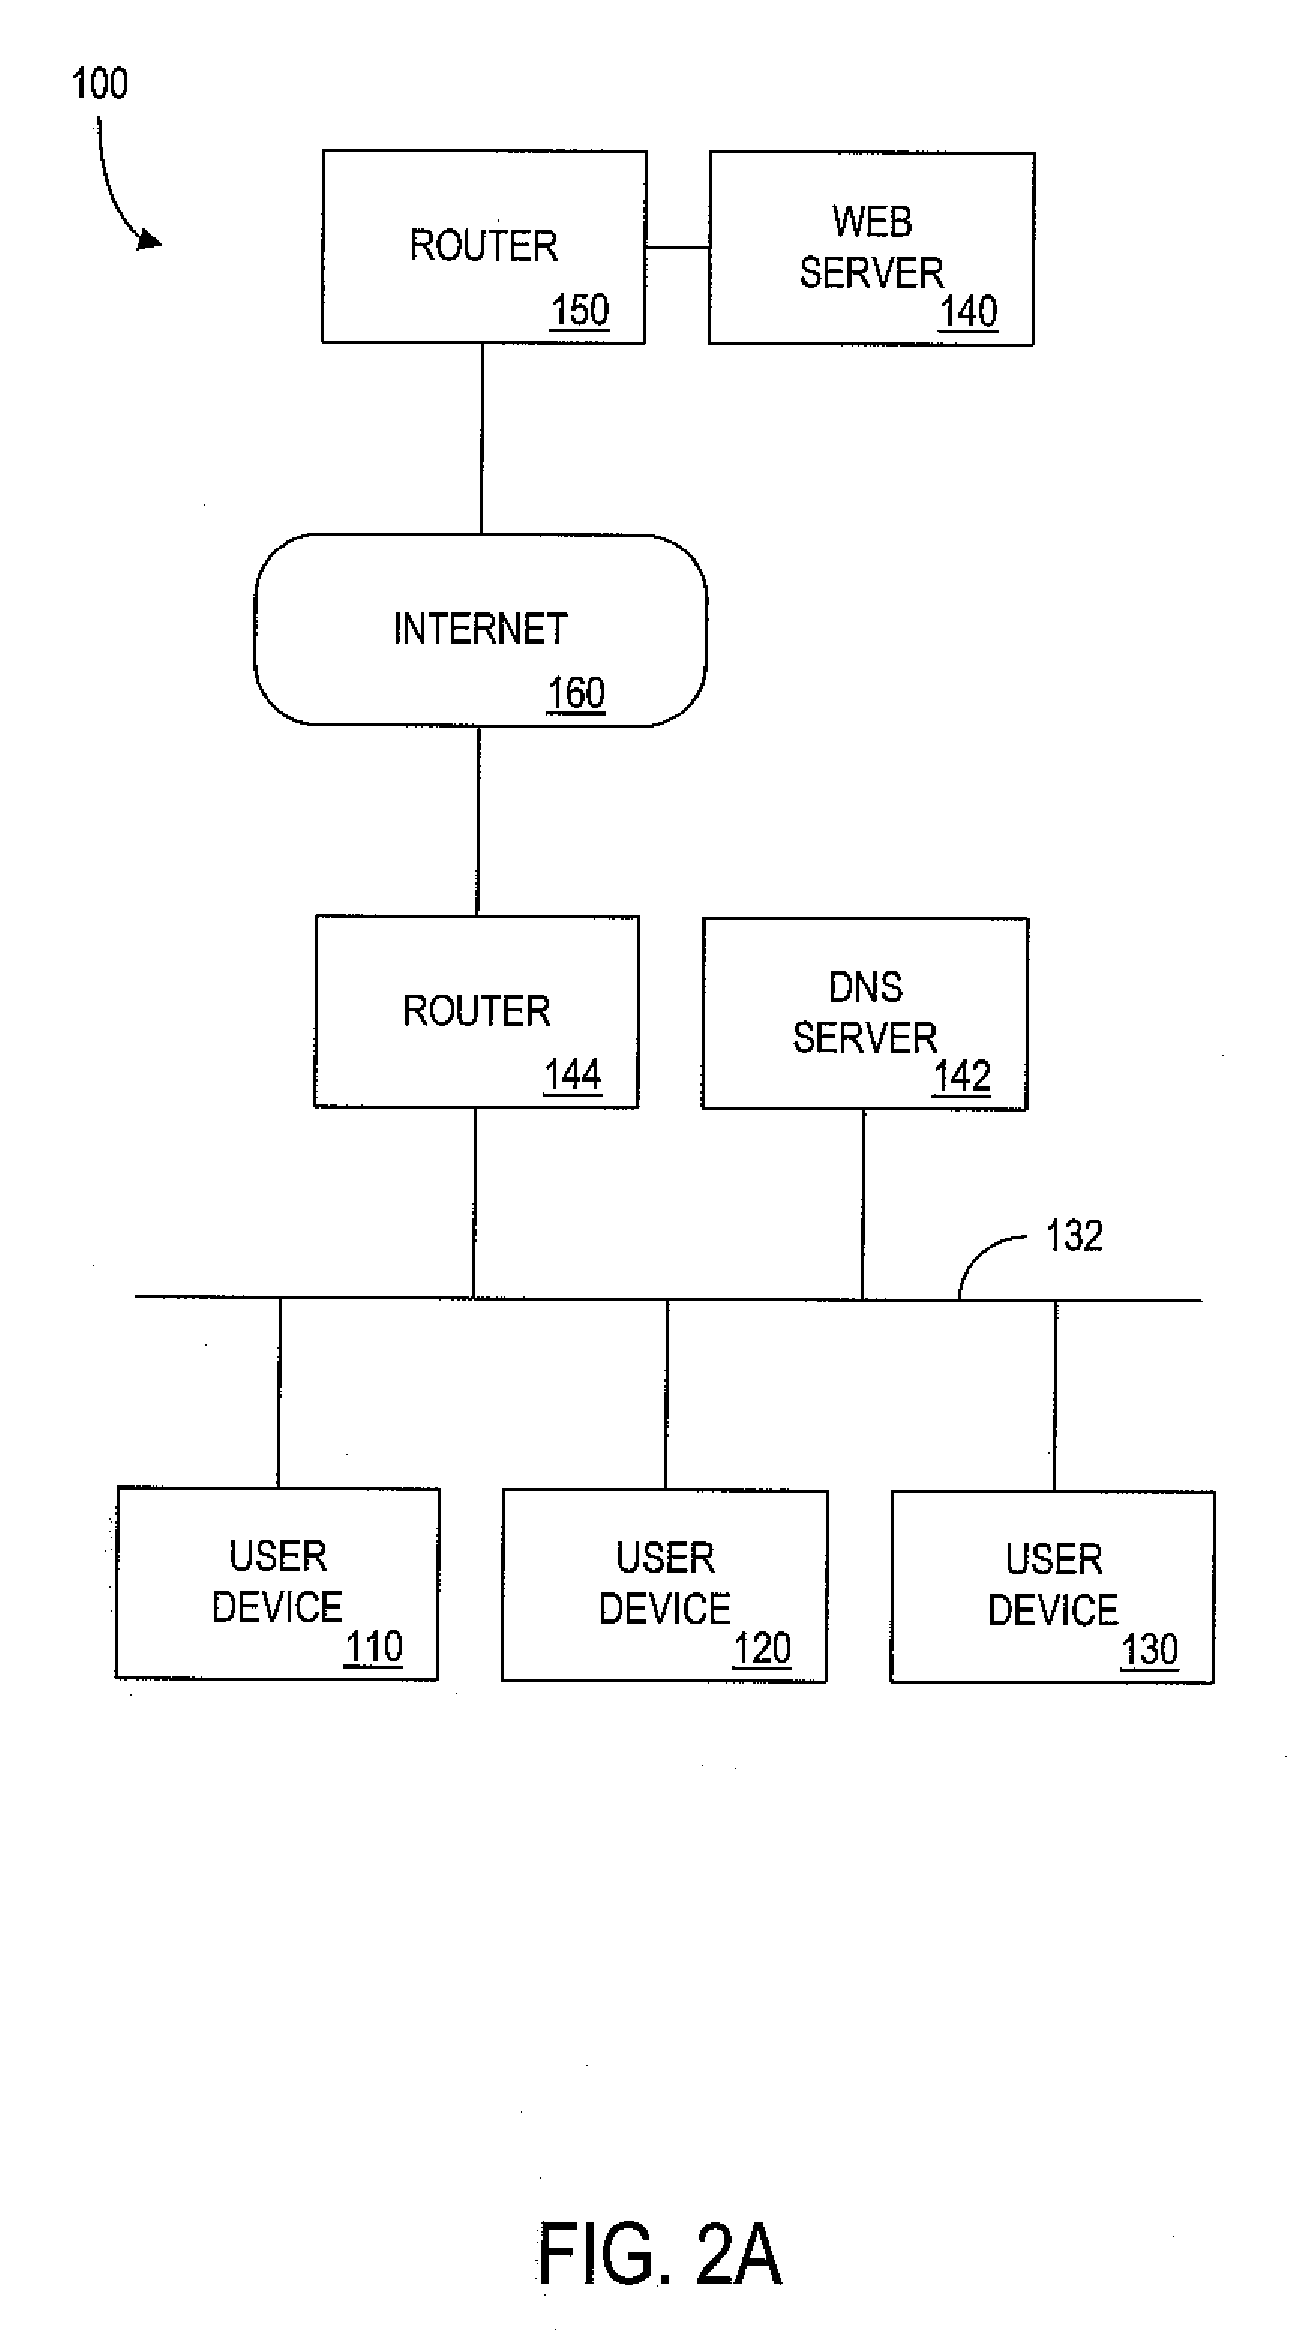 Method and system for providing a link in an electronic file being presented to a user